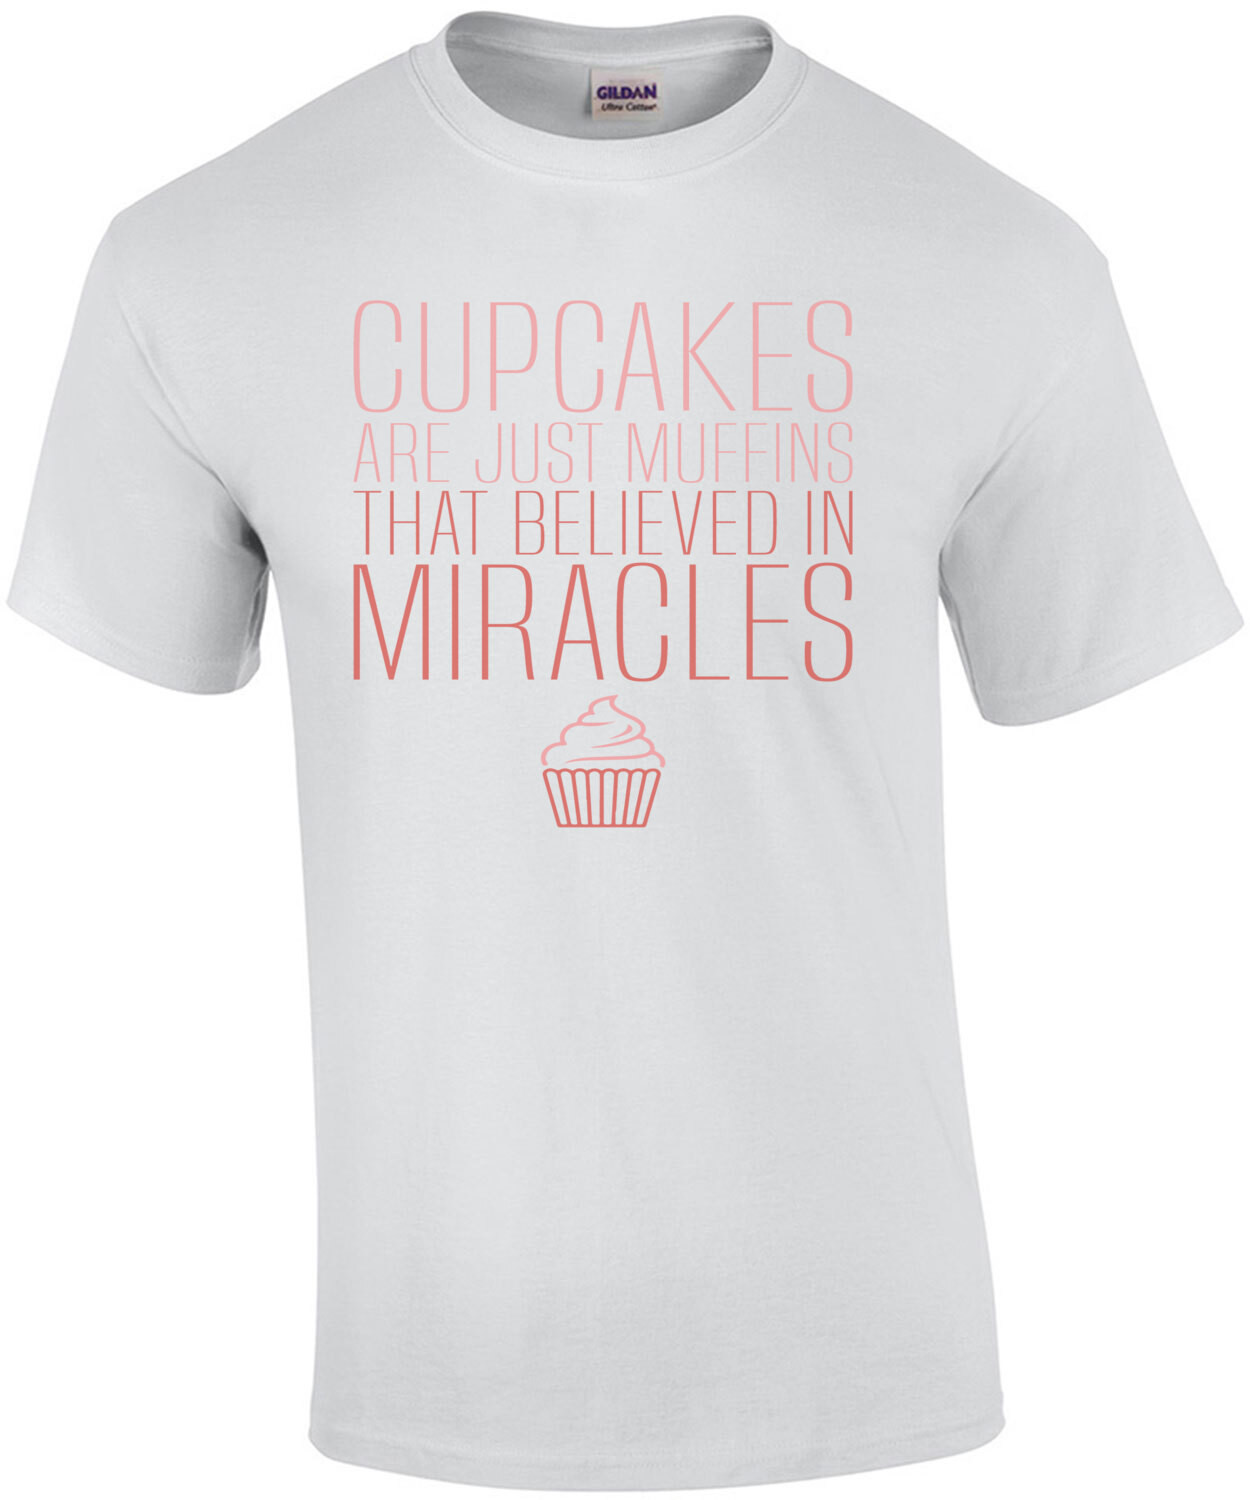 Cupcakes are just muffins that believed in miracles - funny t-shirt